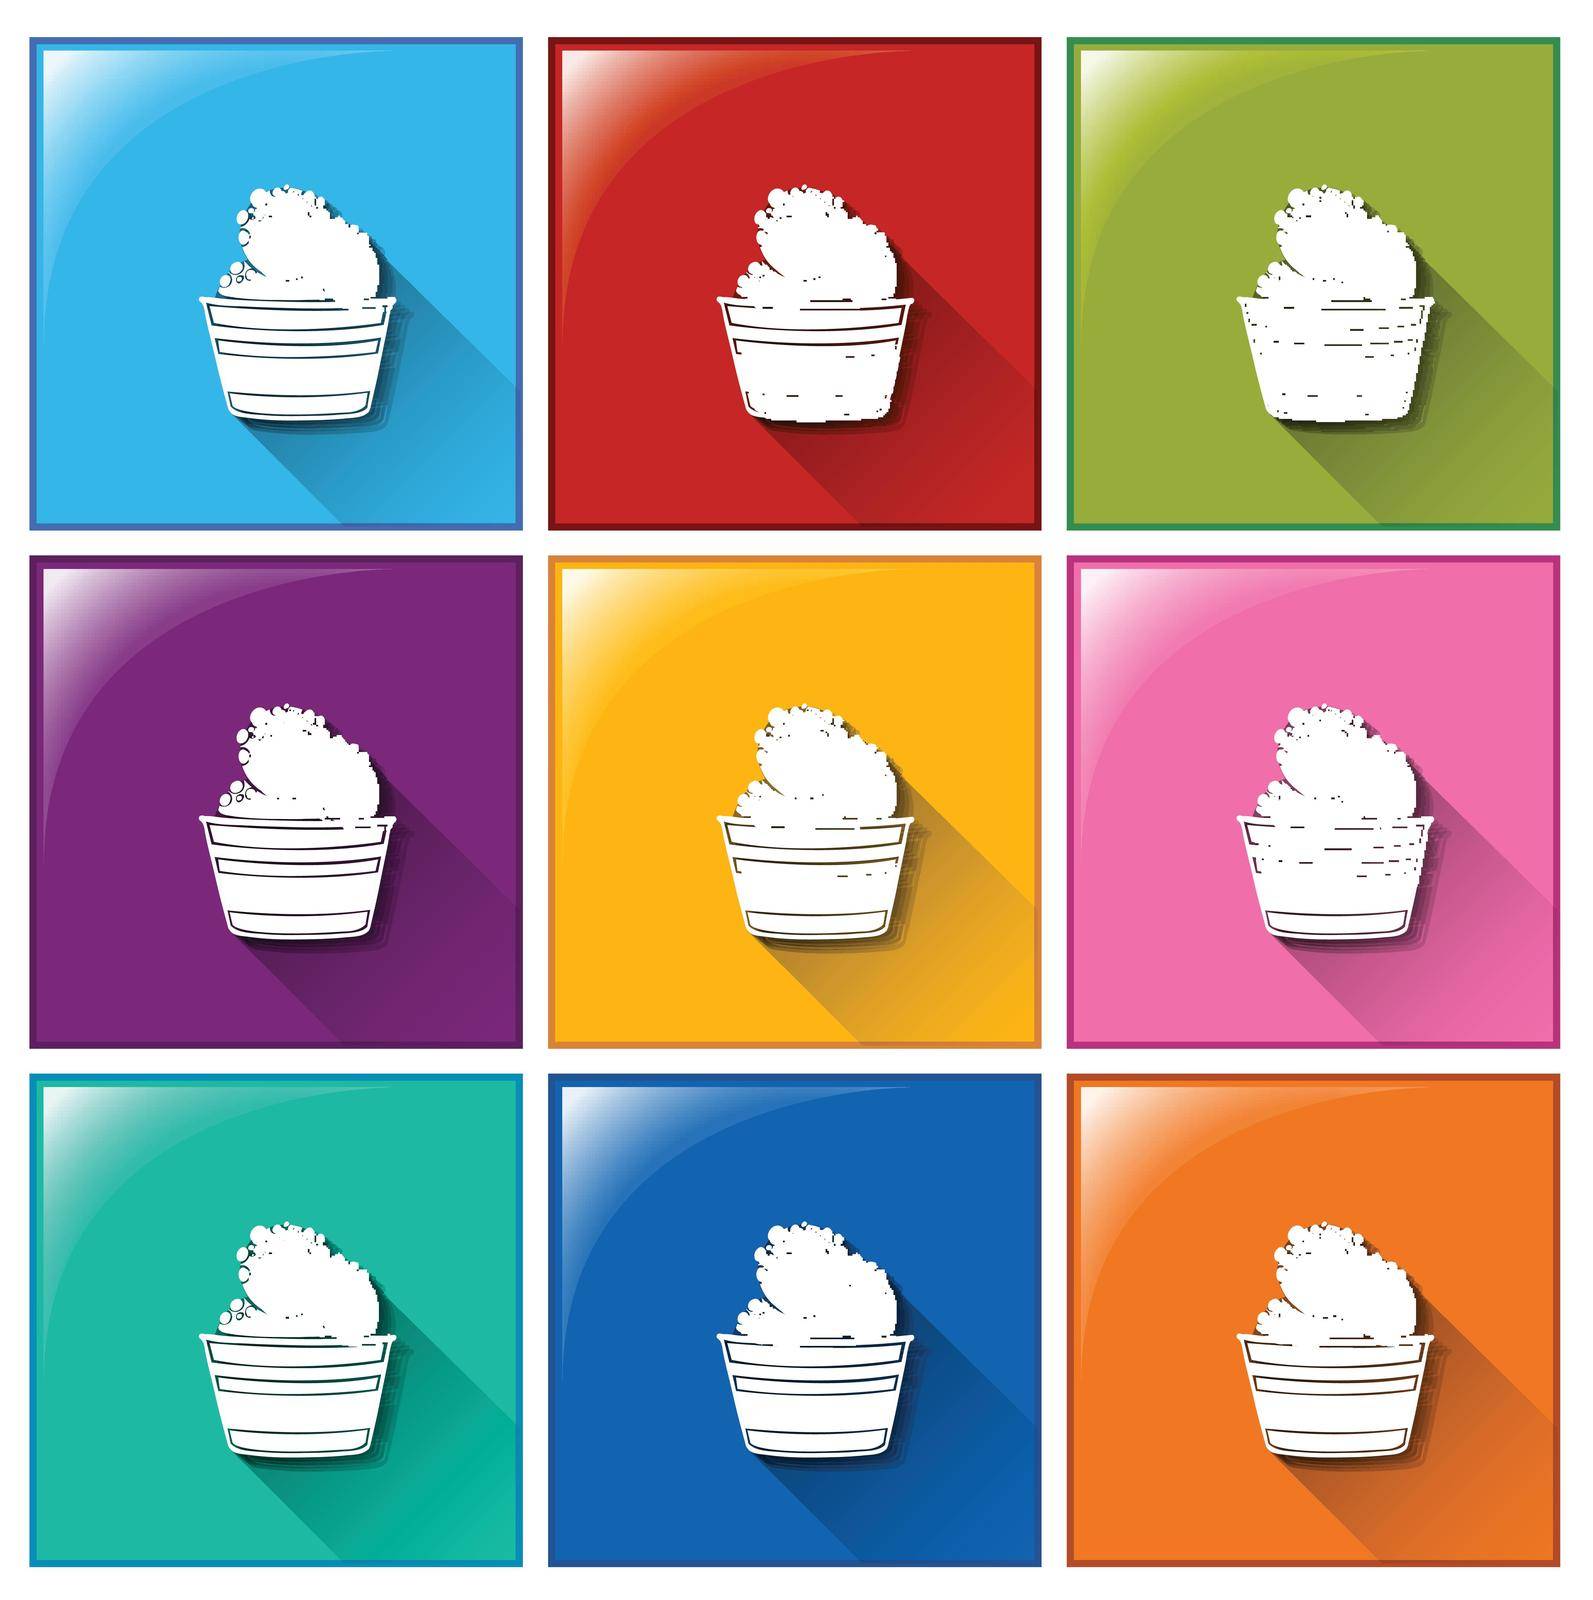 Illustration of the icons with icecream on a white background